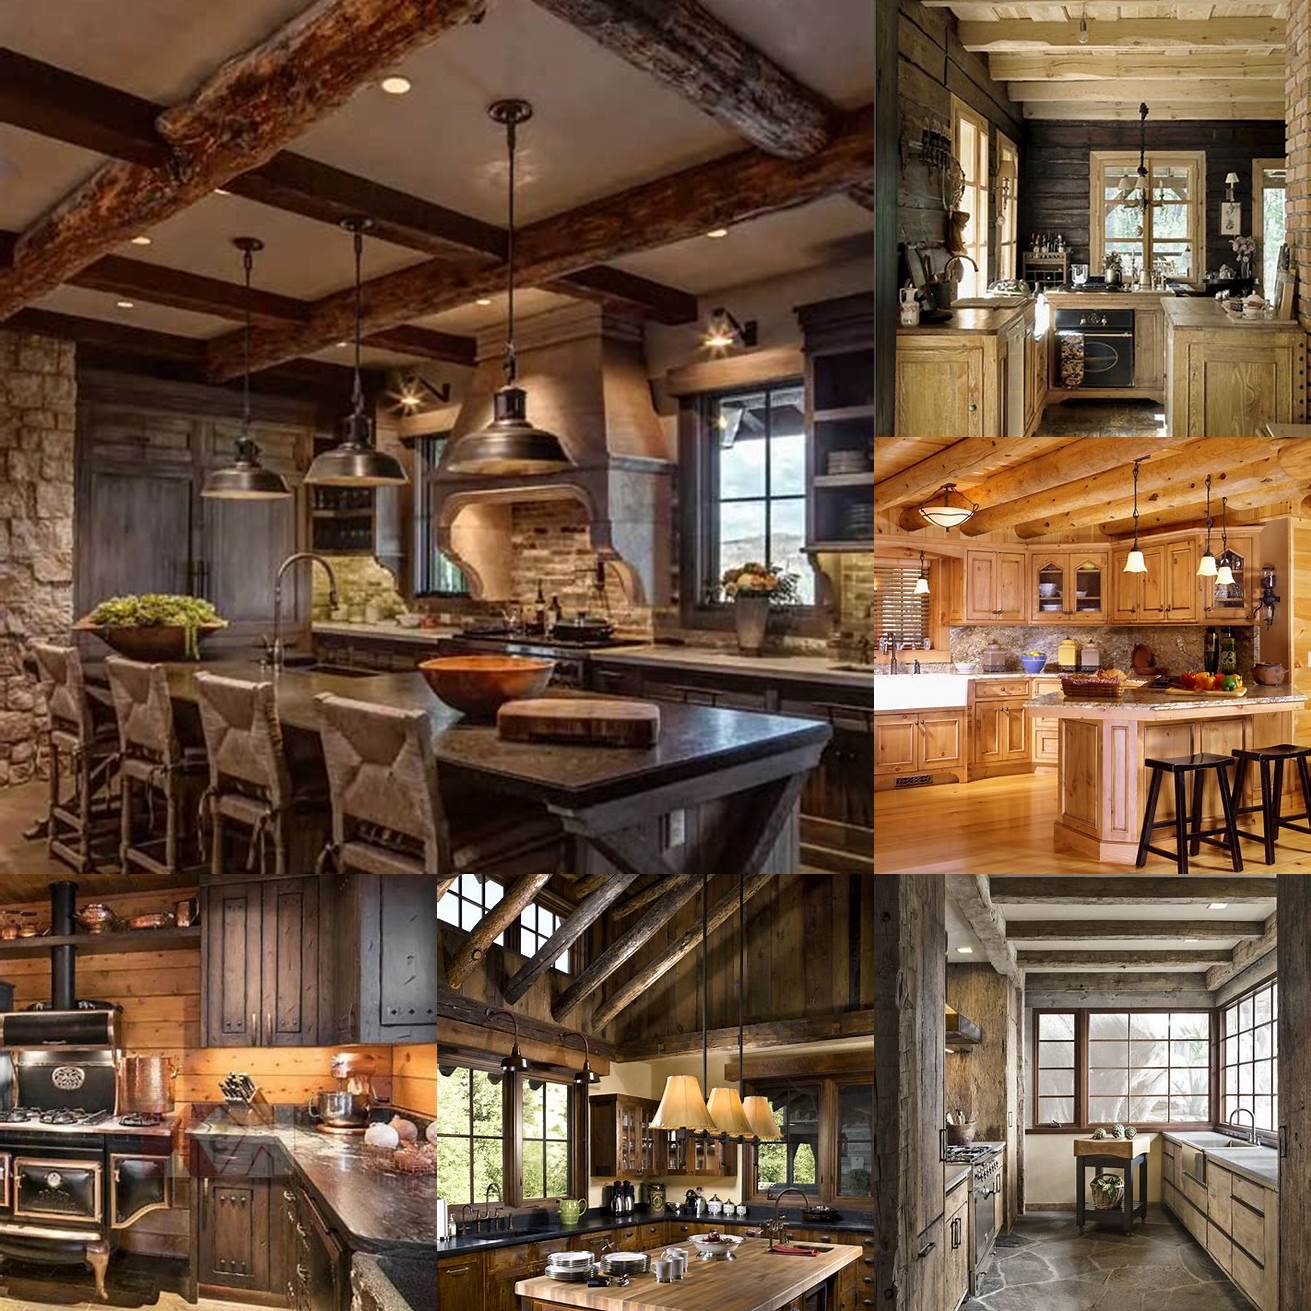 Rustic cabin-style kitchen with stone walls wood plank flooring and a large stone fireplace The vintage-style appliances and furniture add to the cozy cabin-like feel